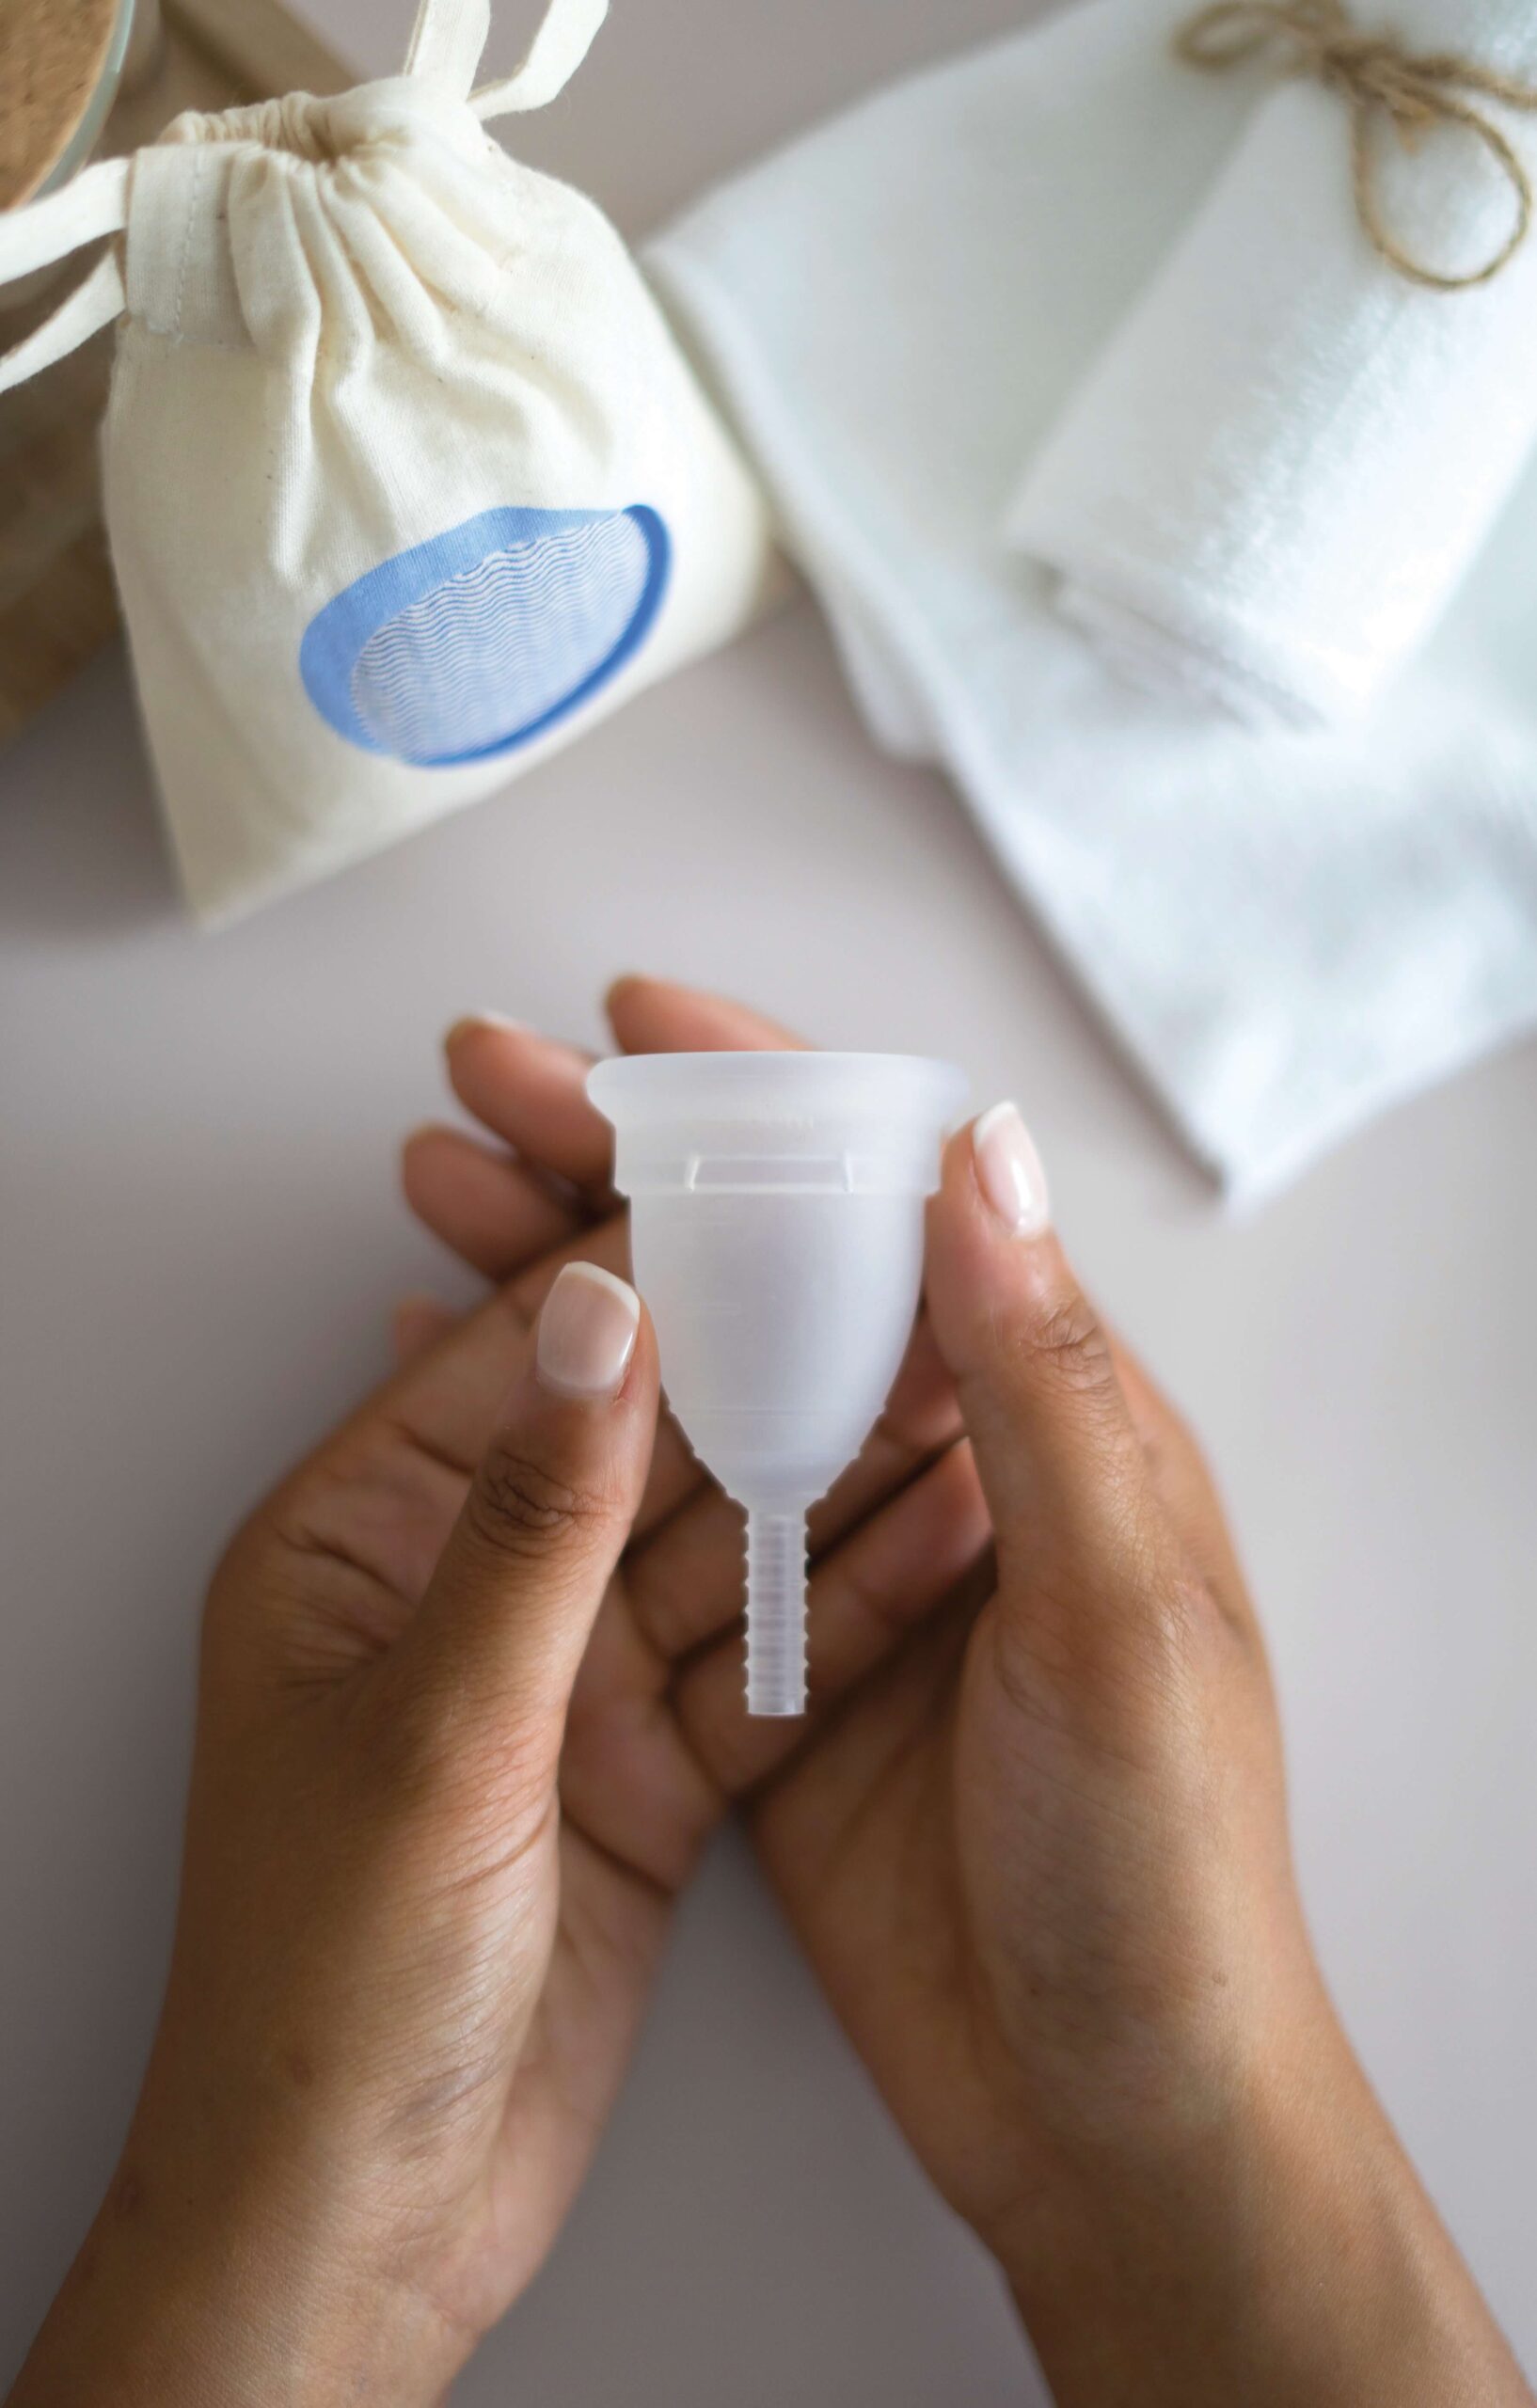  How to Use a Menstrual Cup for the First Time